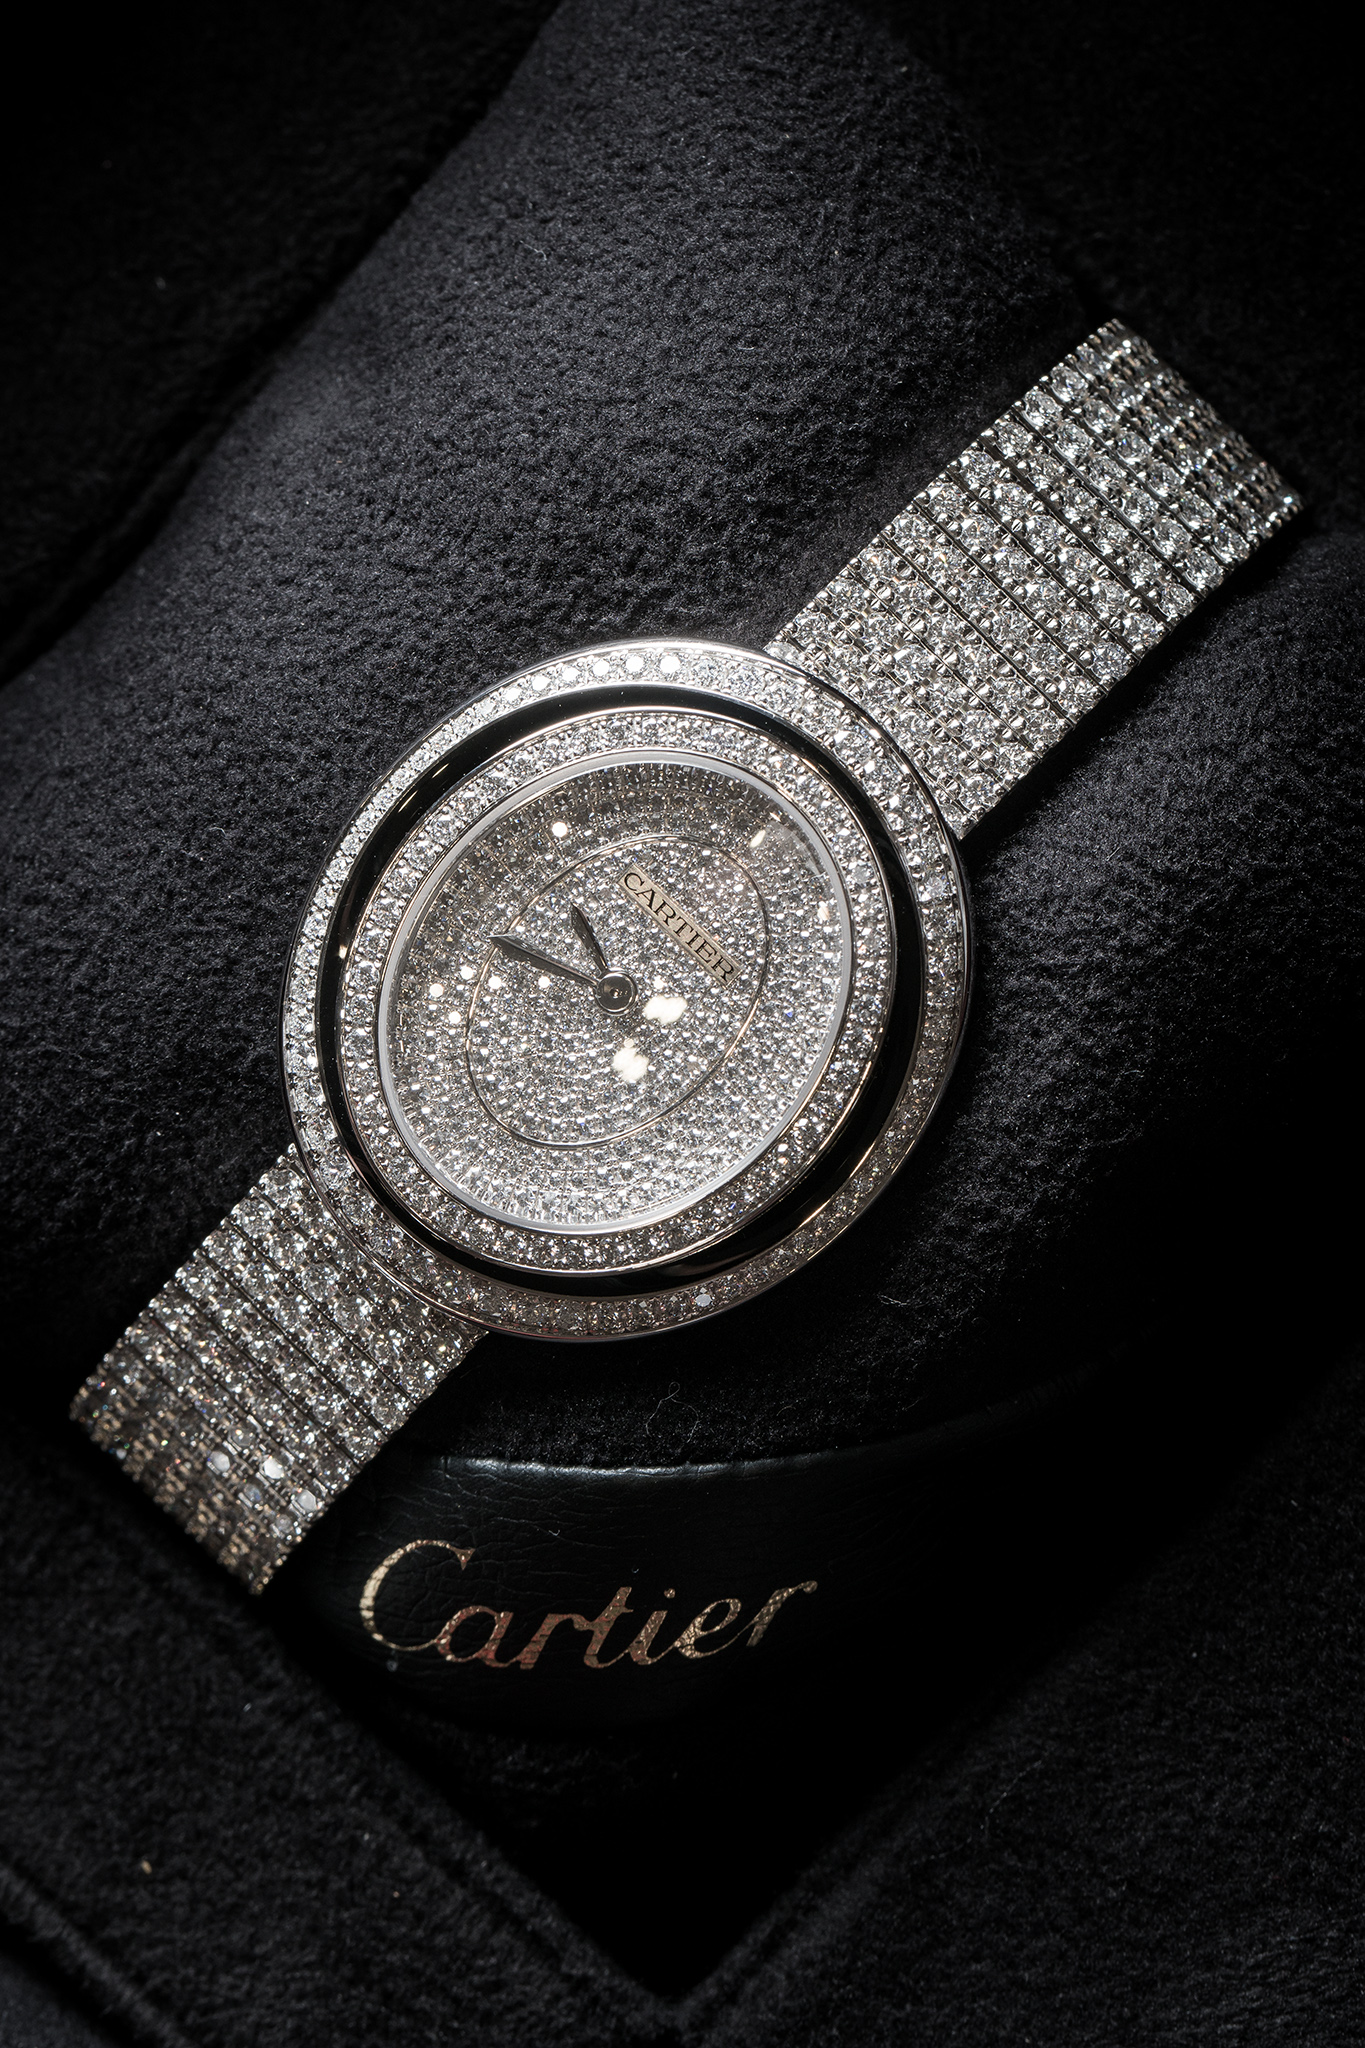 Introducing The Hypnose Watch Collection From Cartier